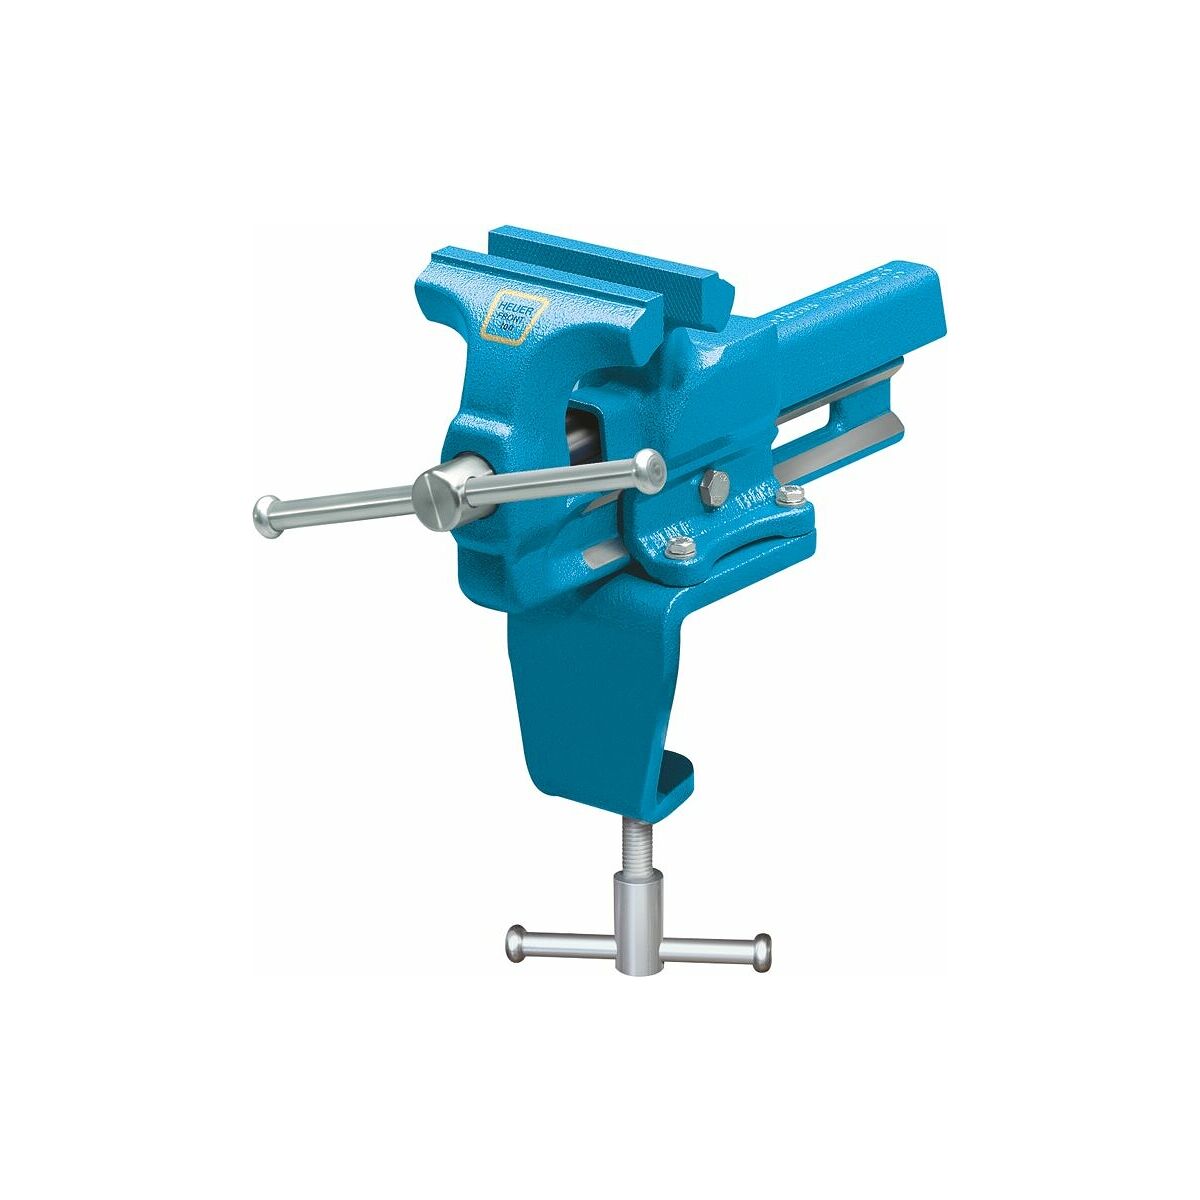 mogelijkheid Toeval eindeloos Simply buy “Heuer-Front” bench vice with bench clamp 100 mm | Hoffmann Group